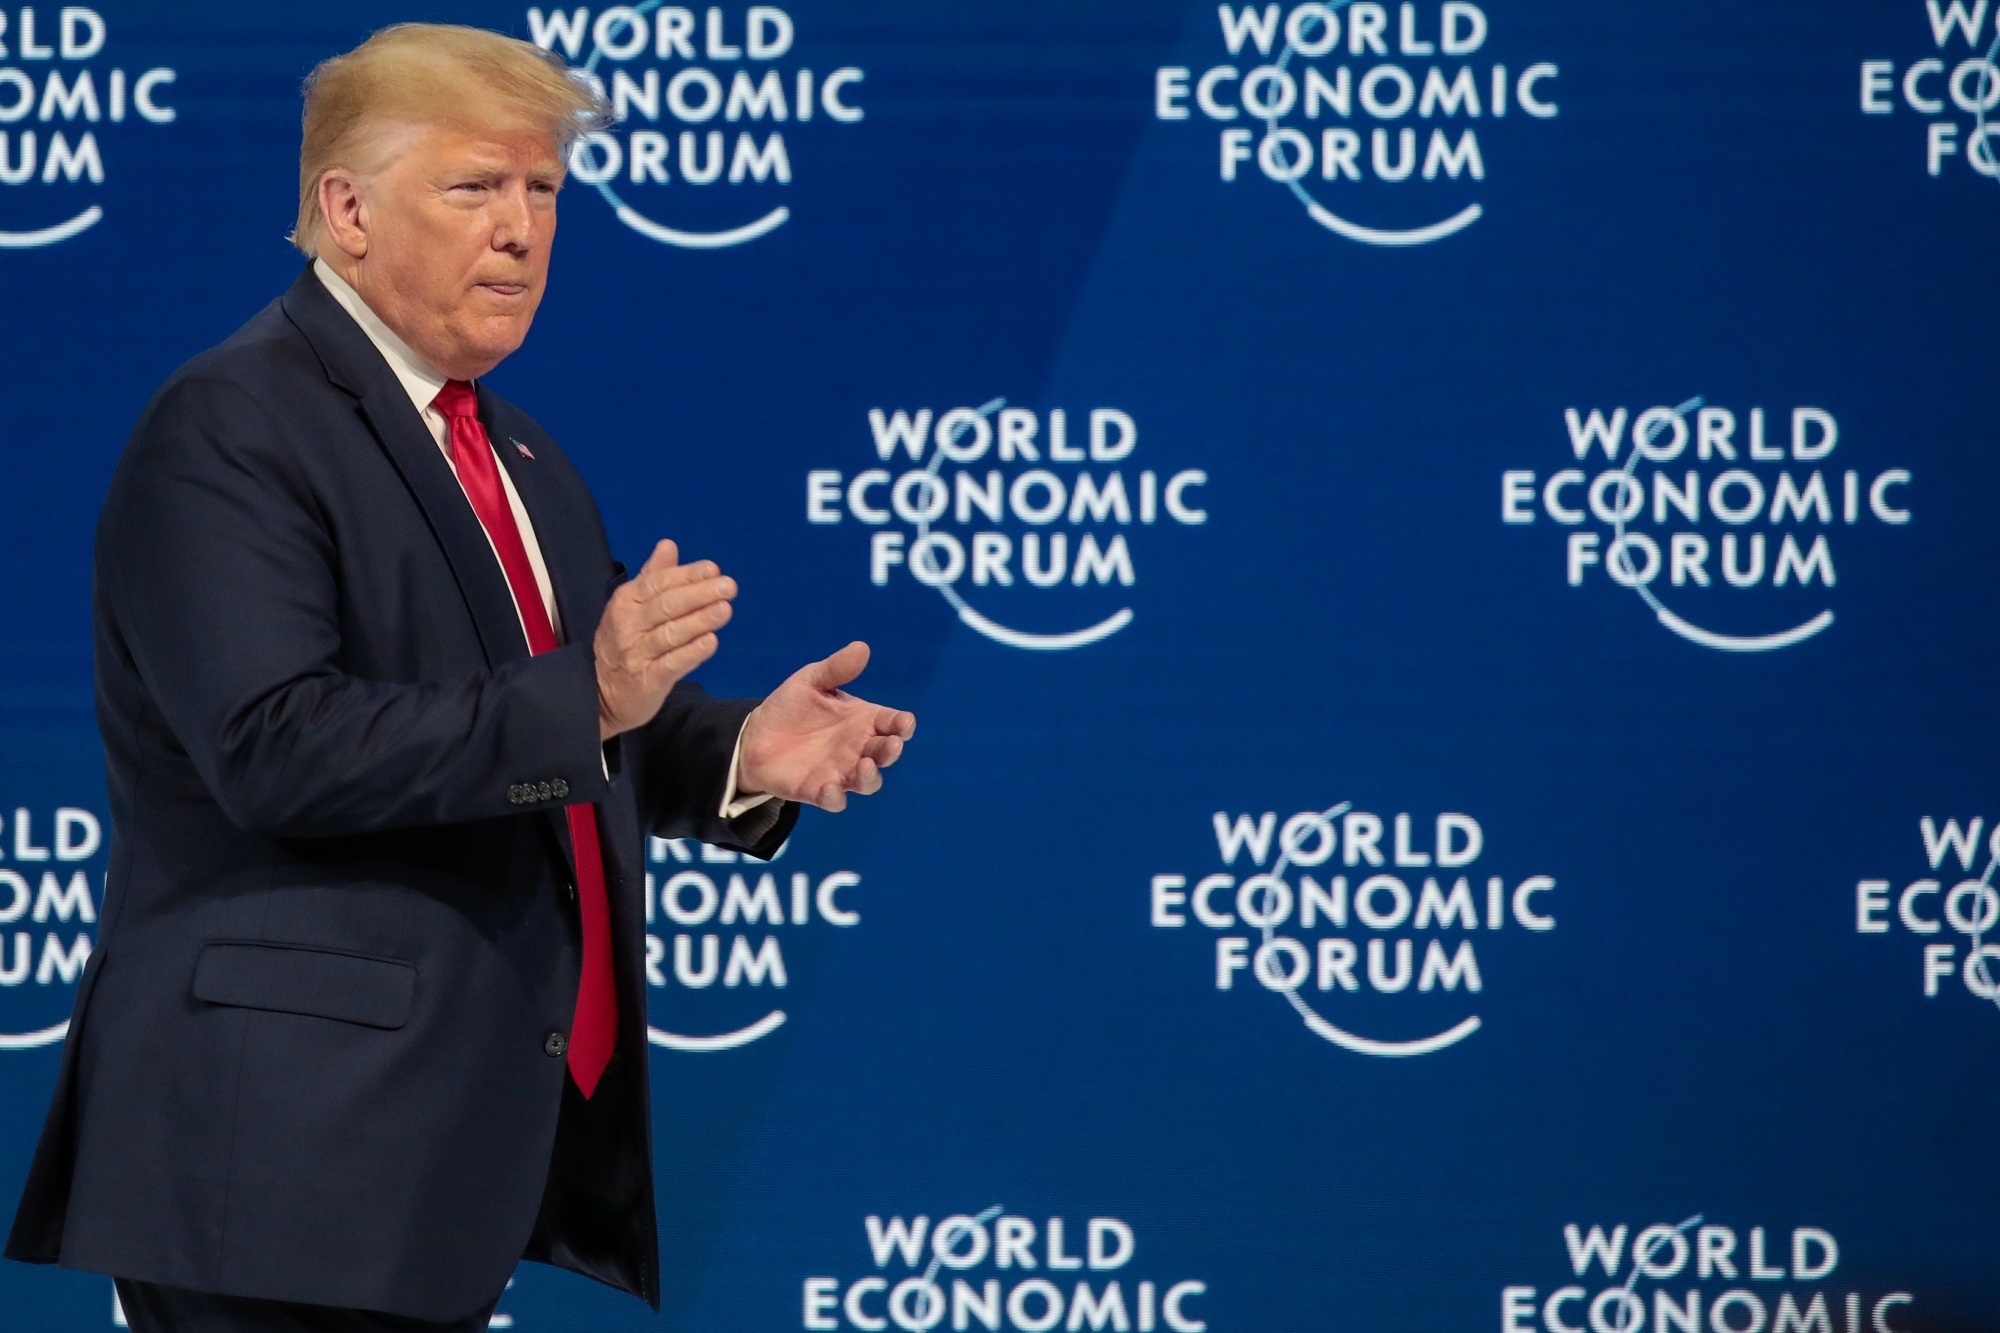 U.S. President Donald Trump applauds during a special address on the opening day of the World Economic Forum in Davos.